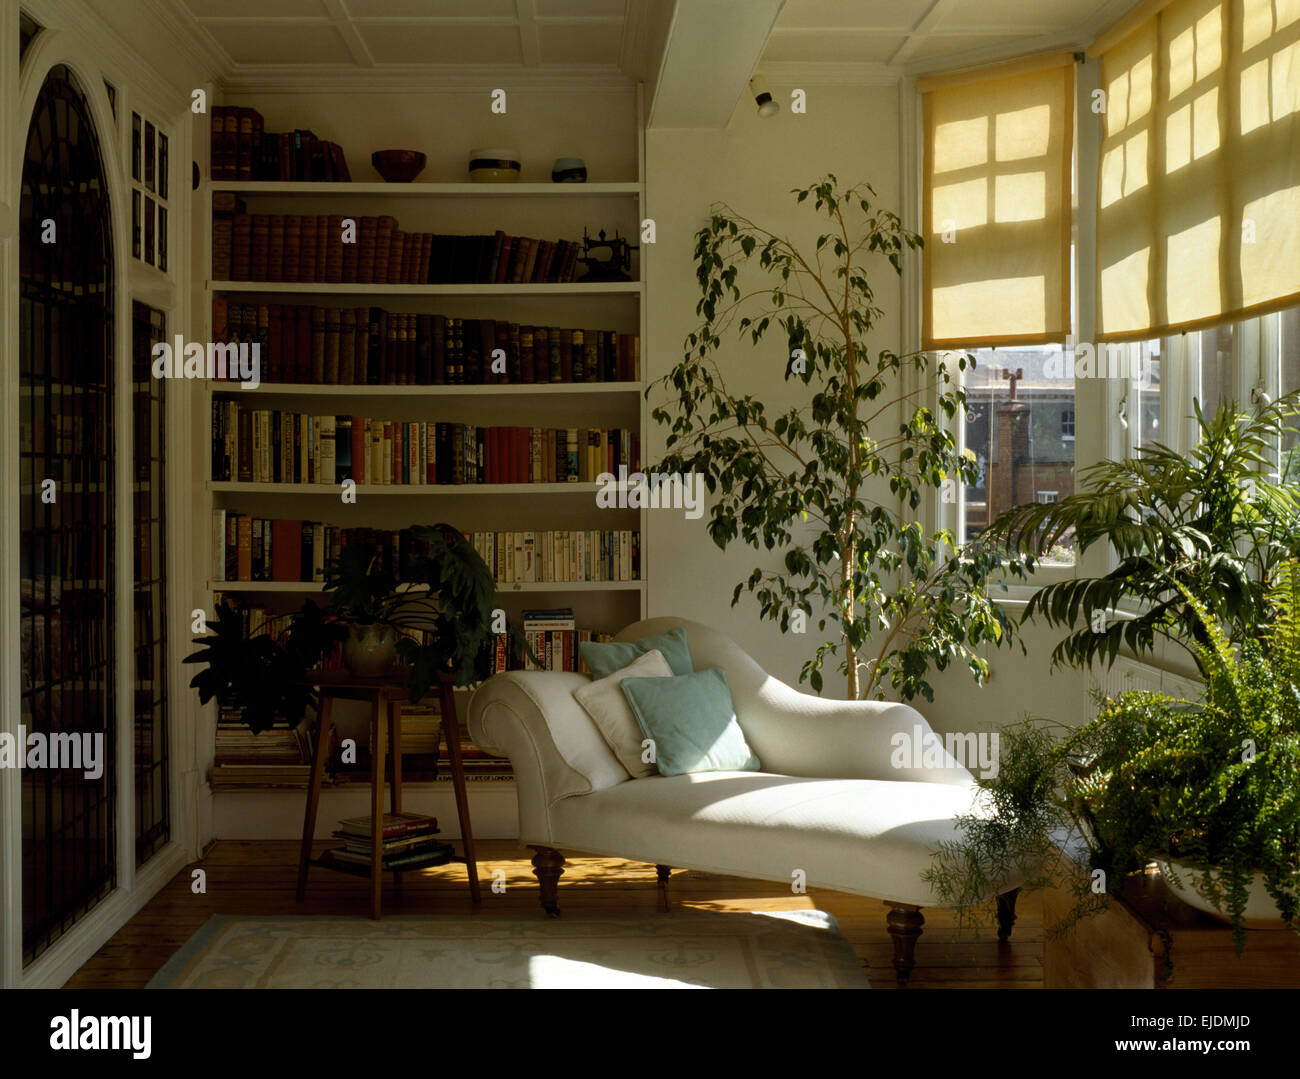 Houseplants and white chaise longue in eighties living room Stock Photo